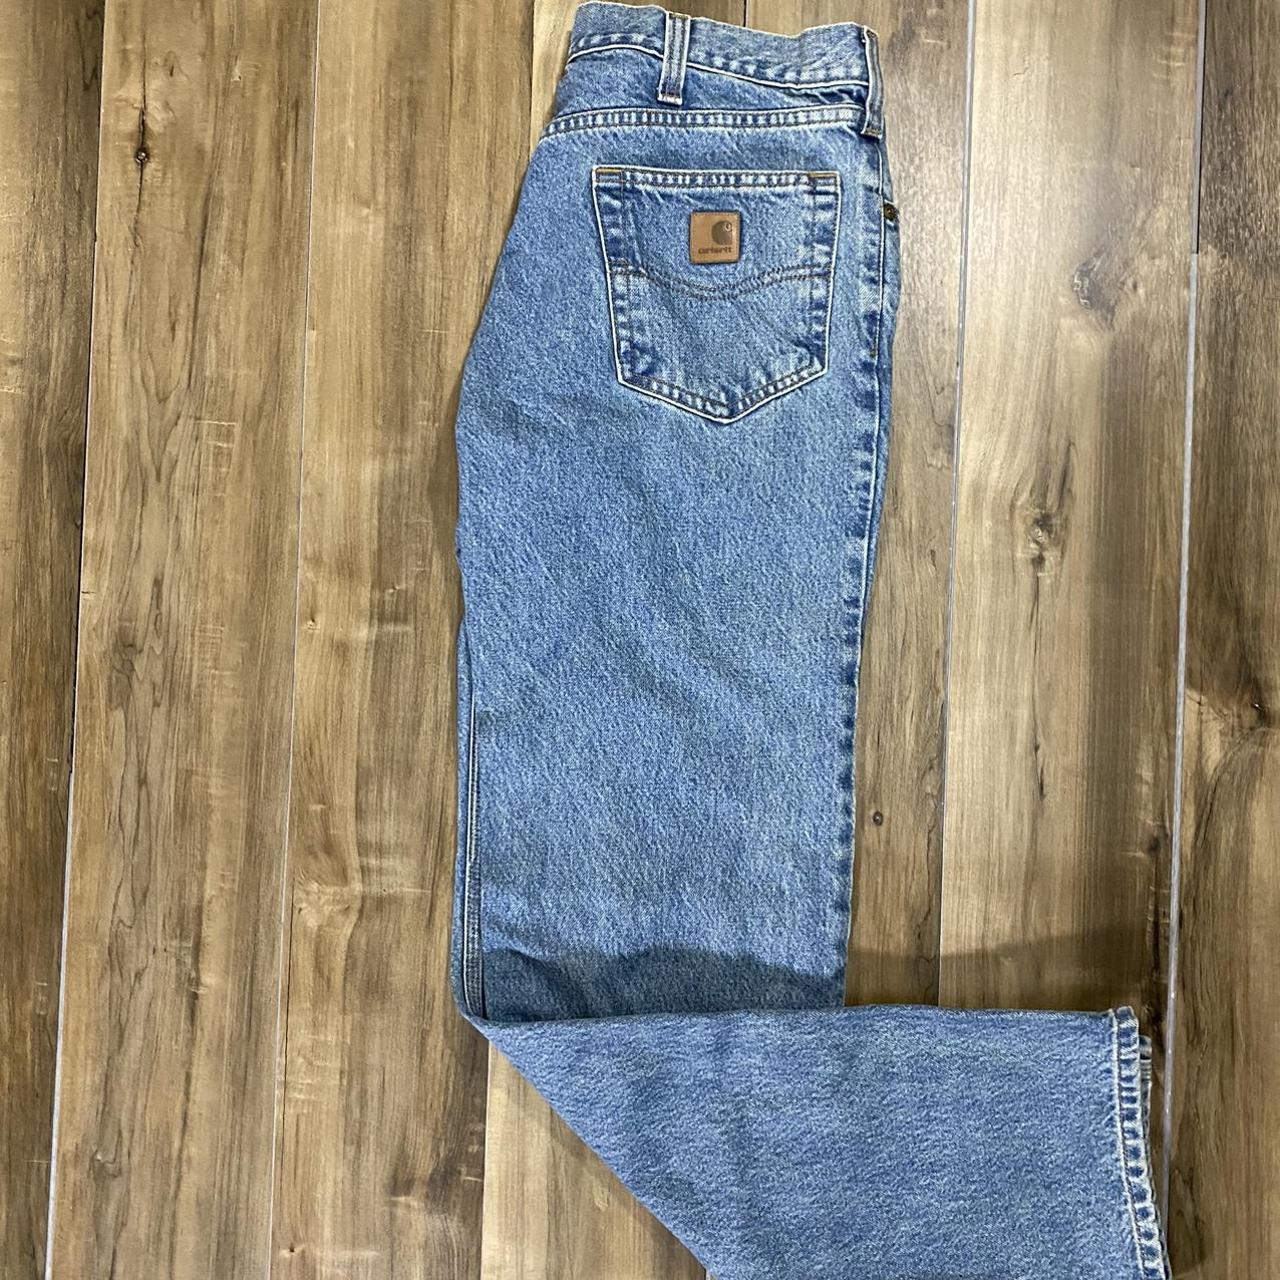 Product Image 1 - Vintage 90s Carhartt jeans! These